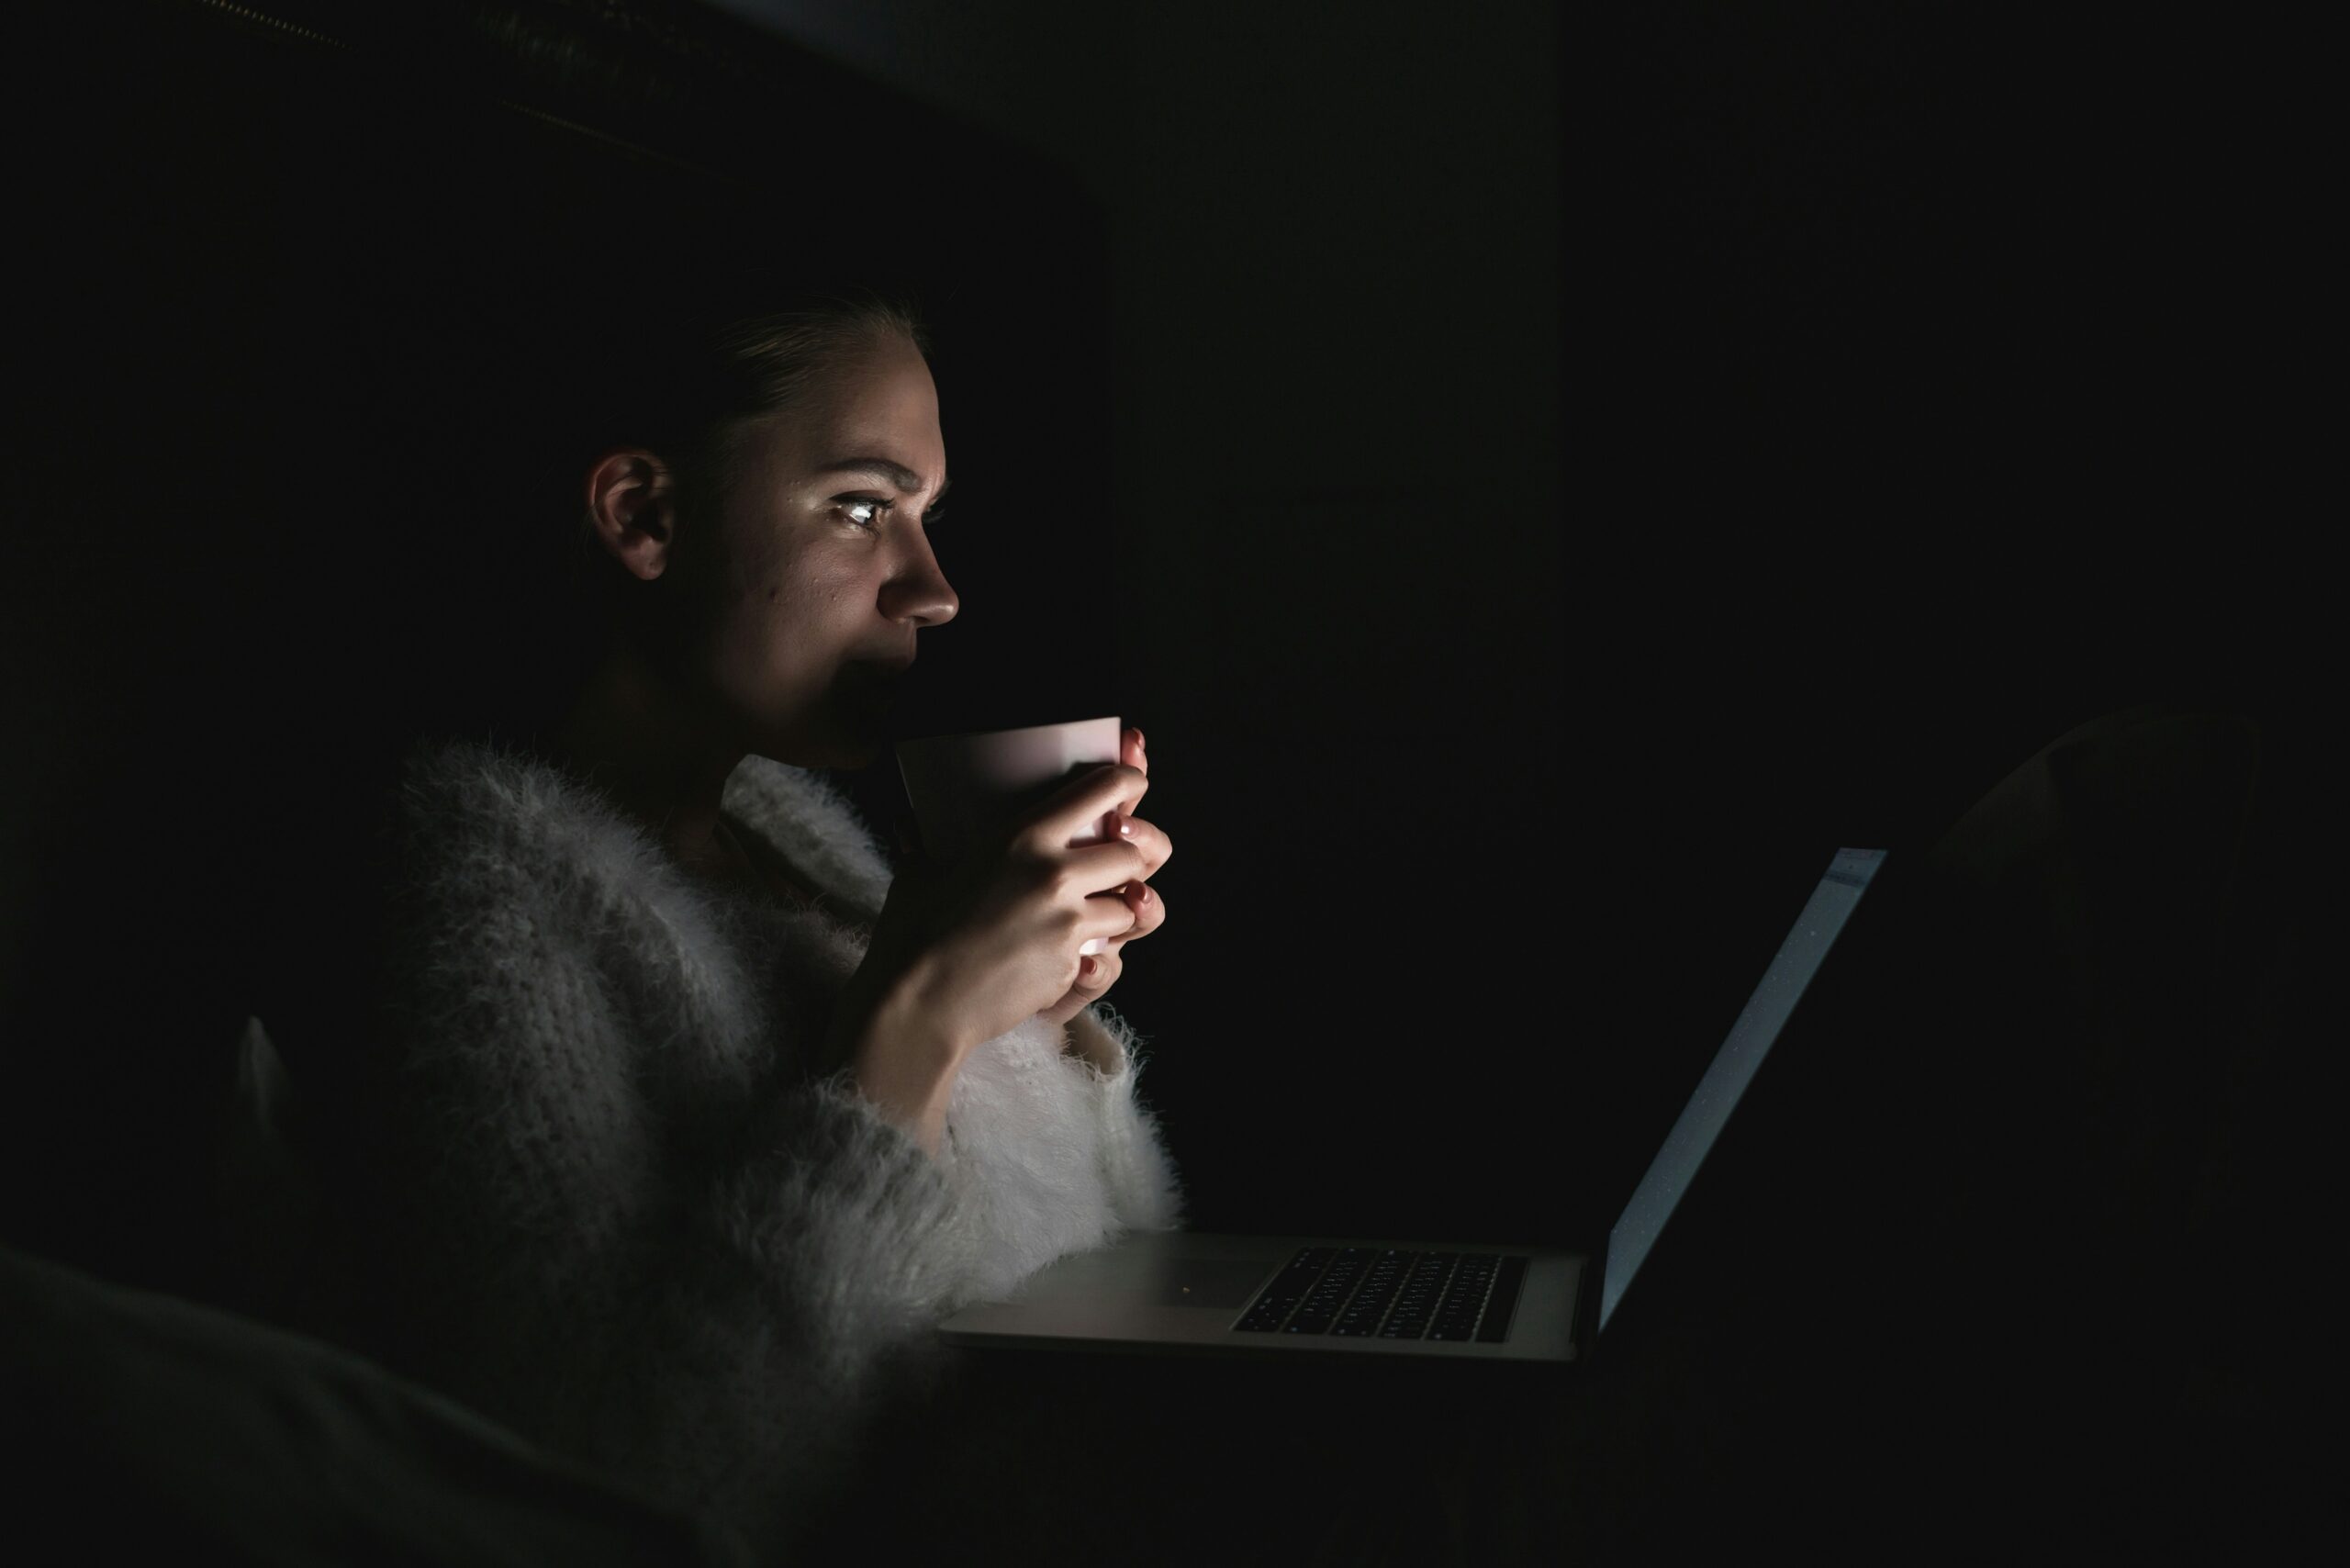 A woman browsing on her laptop while in bed